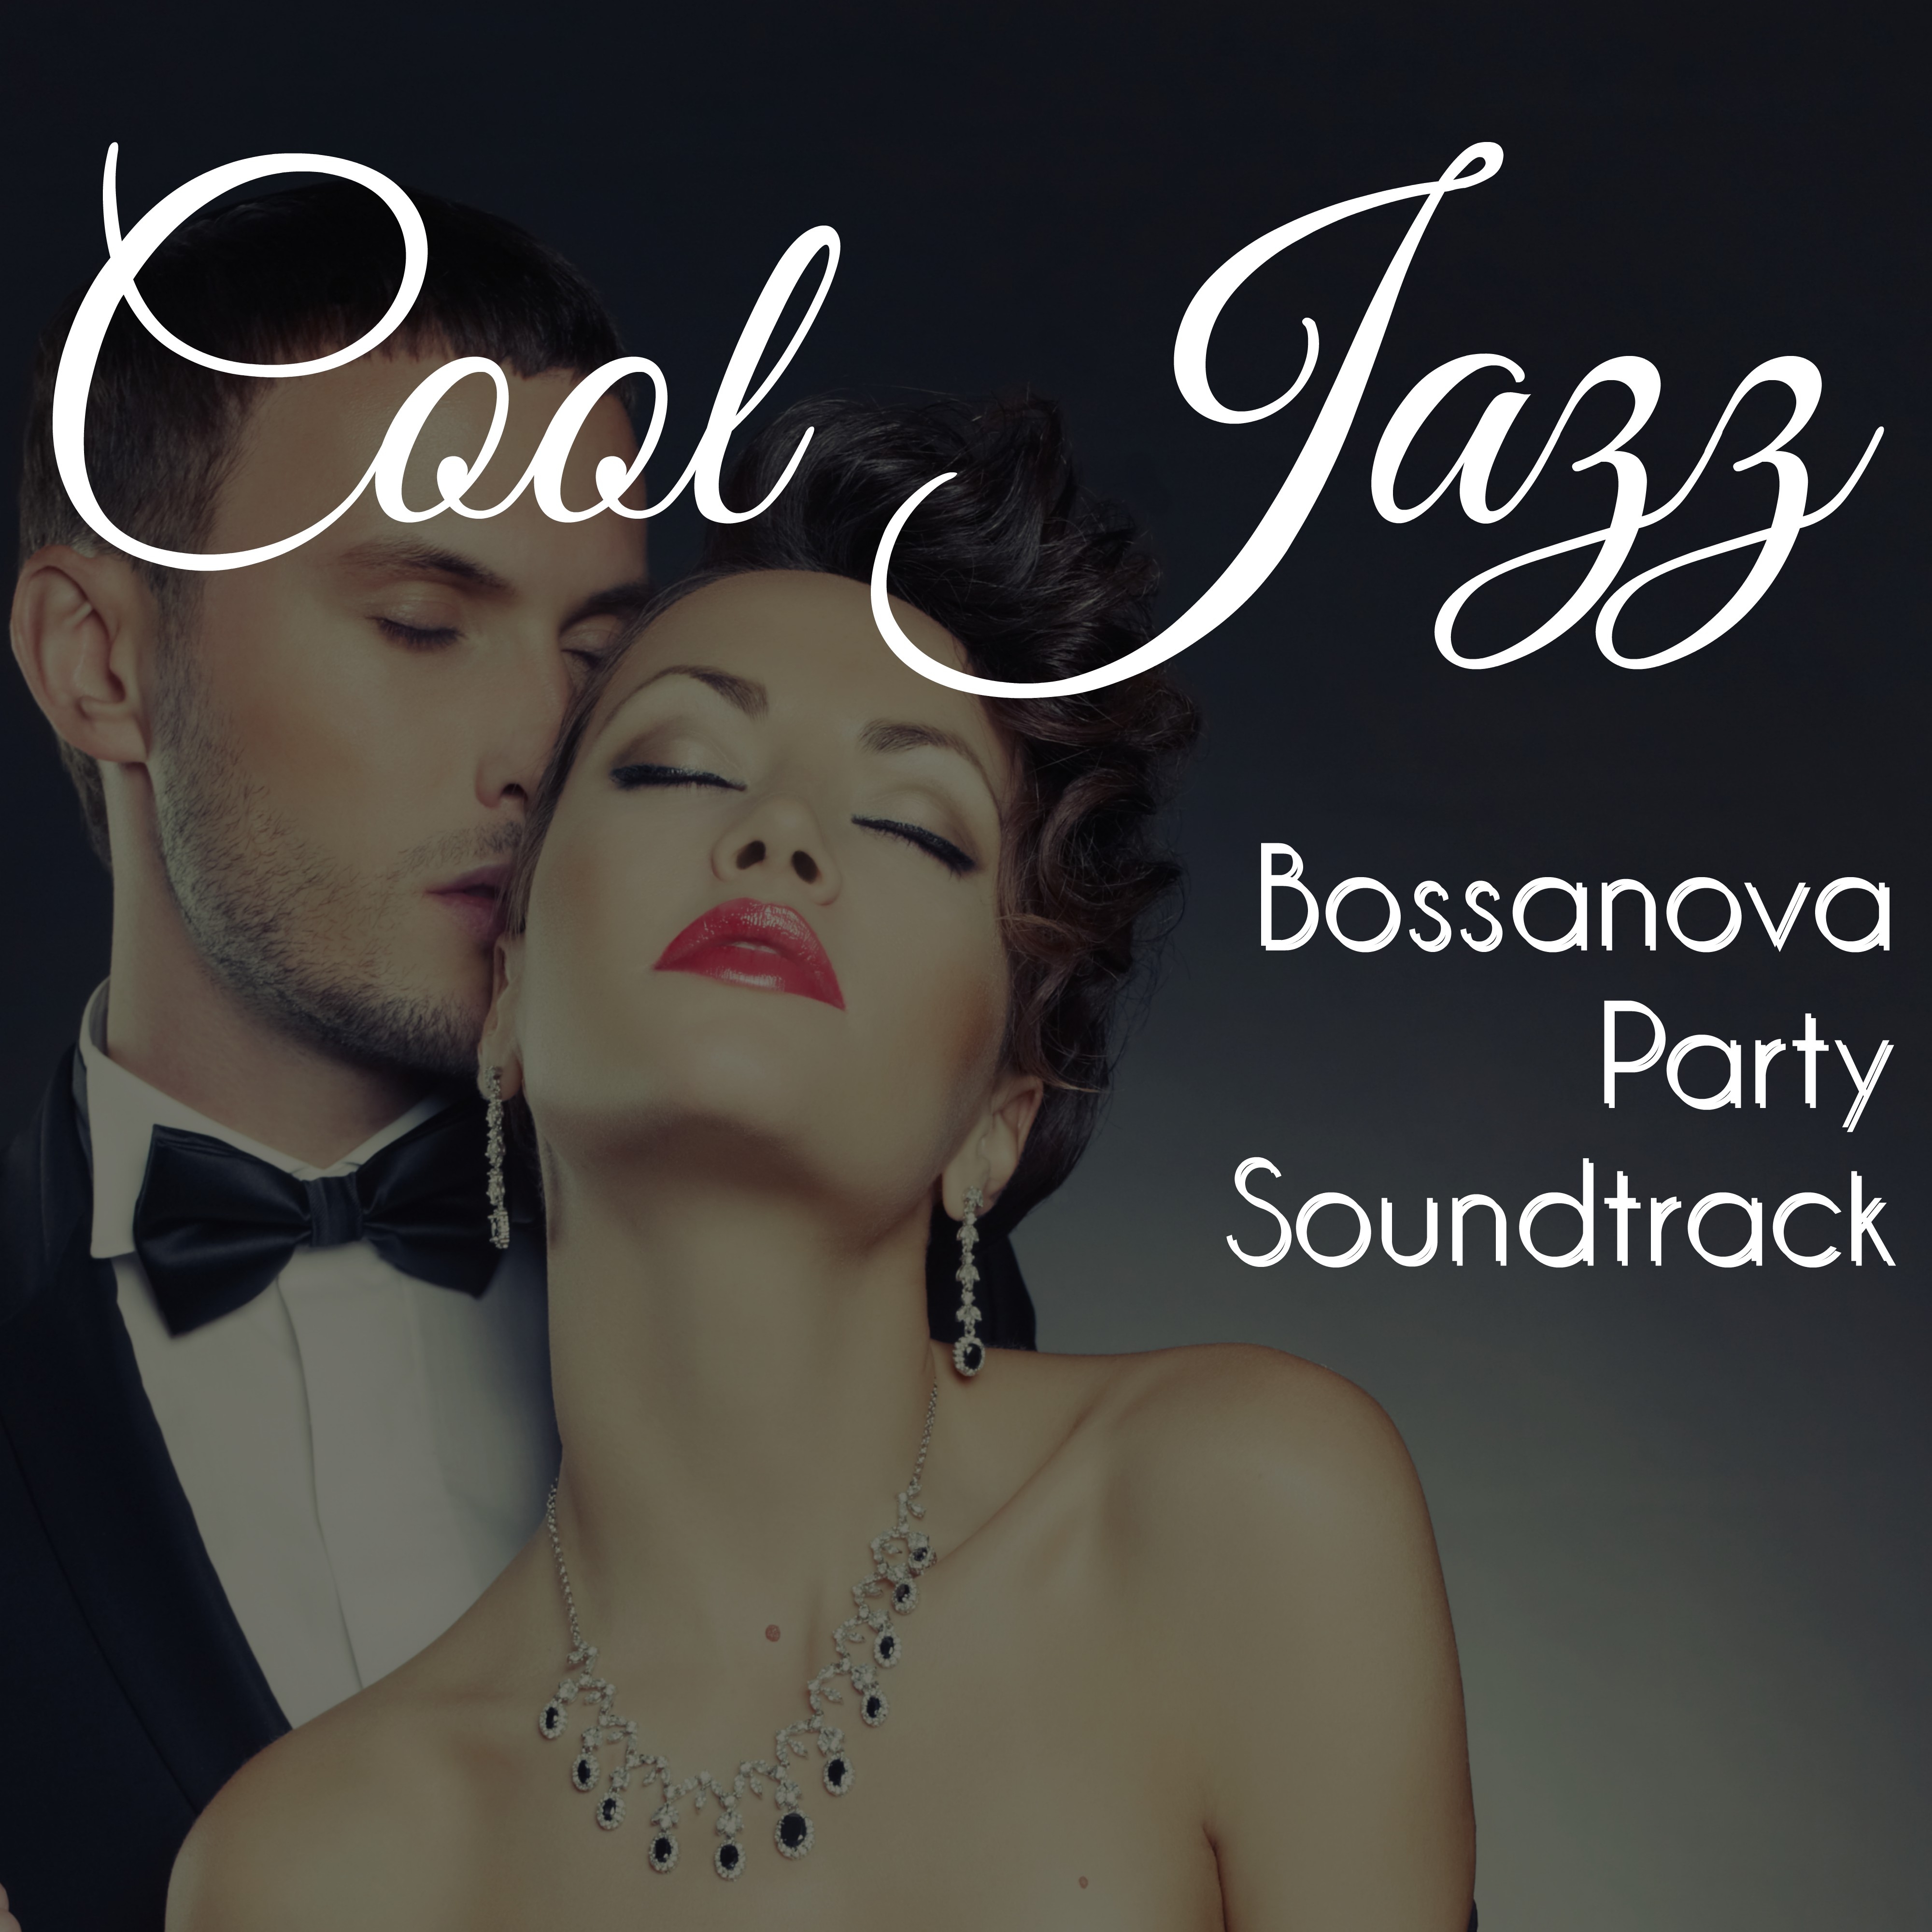 Cool Jazz  Bossanova Party Soundtrack, Smooth Jazz  Blues, Cocktail and Dinner Music